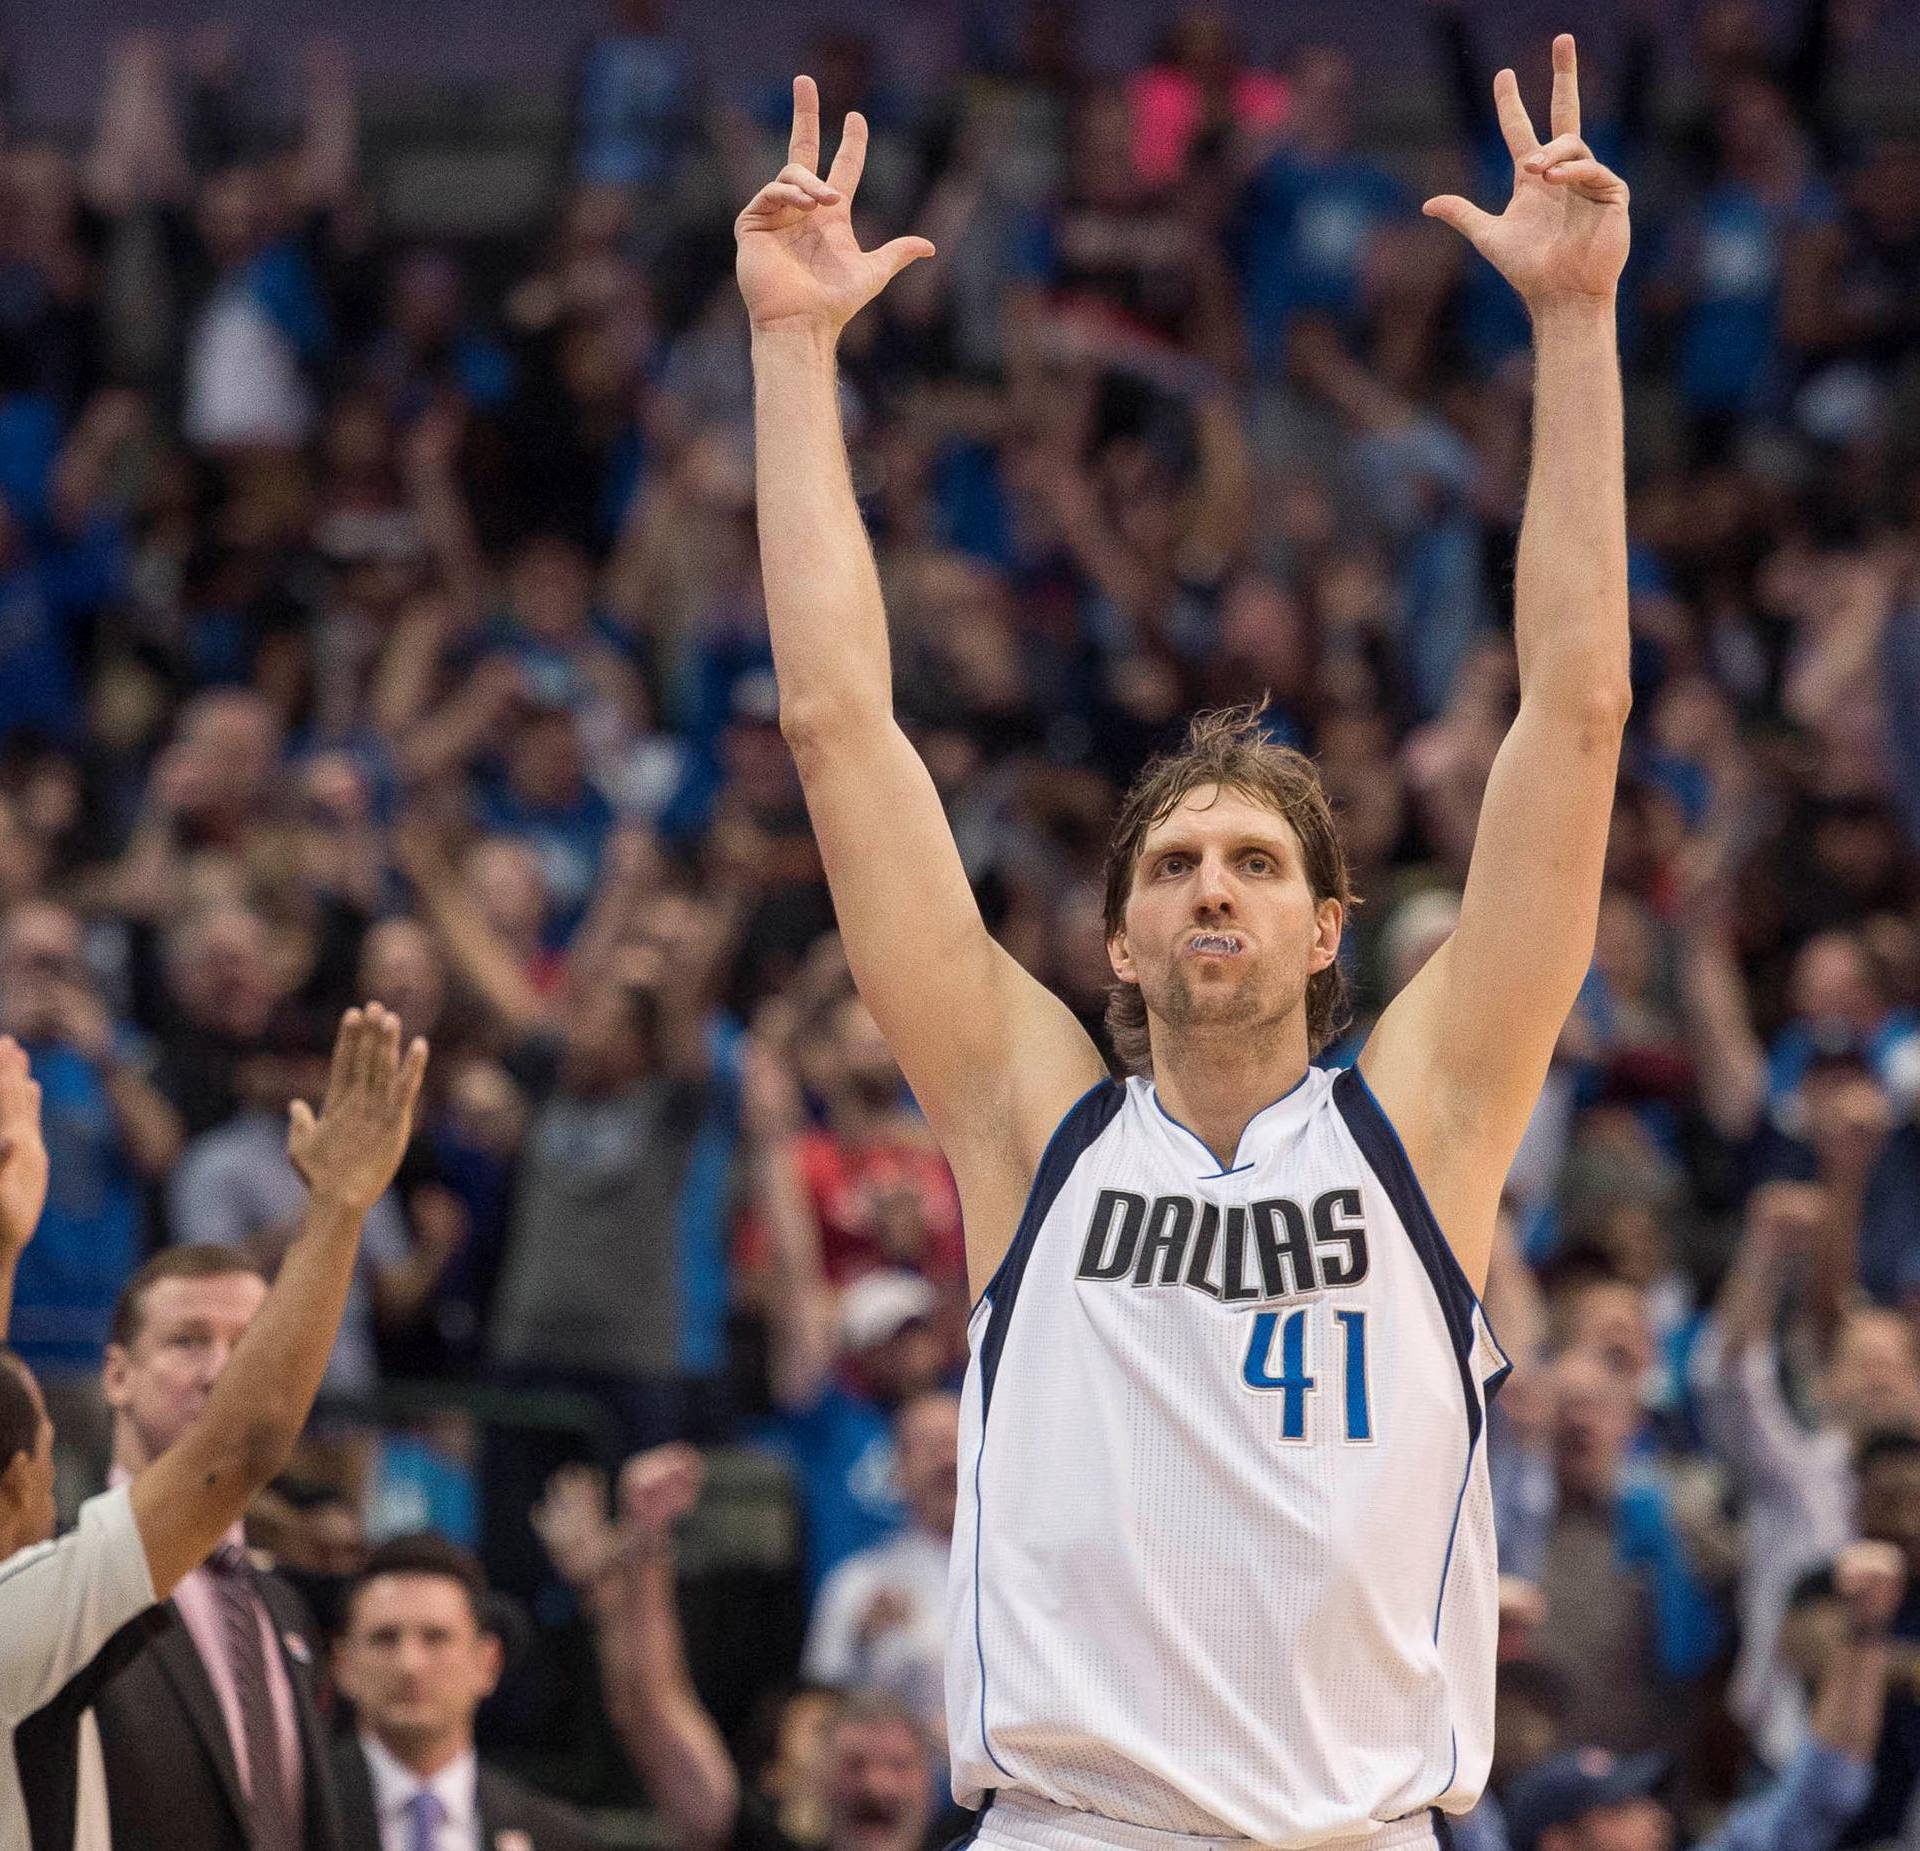 File Photo: Dallas Mavericks forward Dirk Nowitzki (41) celebrates after making a three point shot against the Portland Trail Blazers during the second half  in Dallas